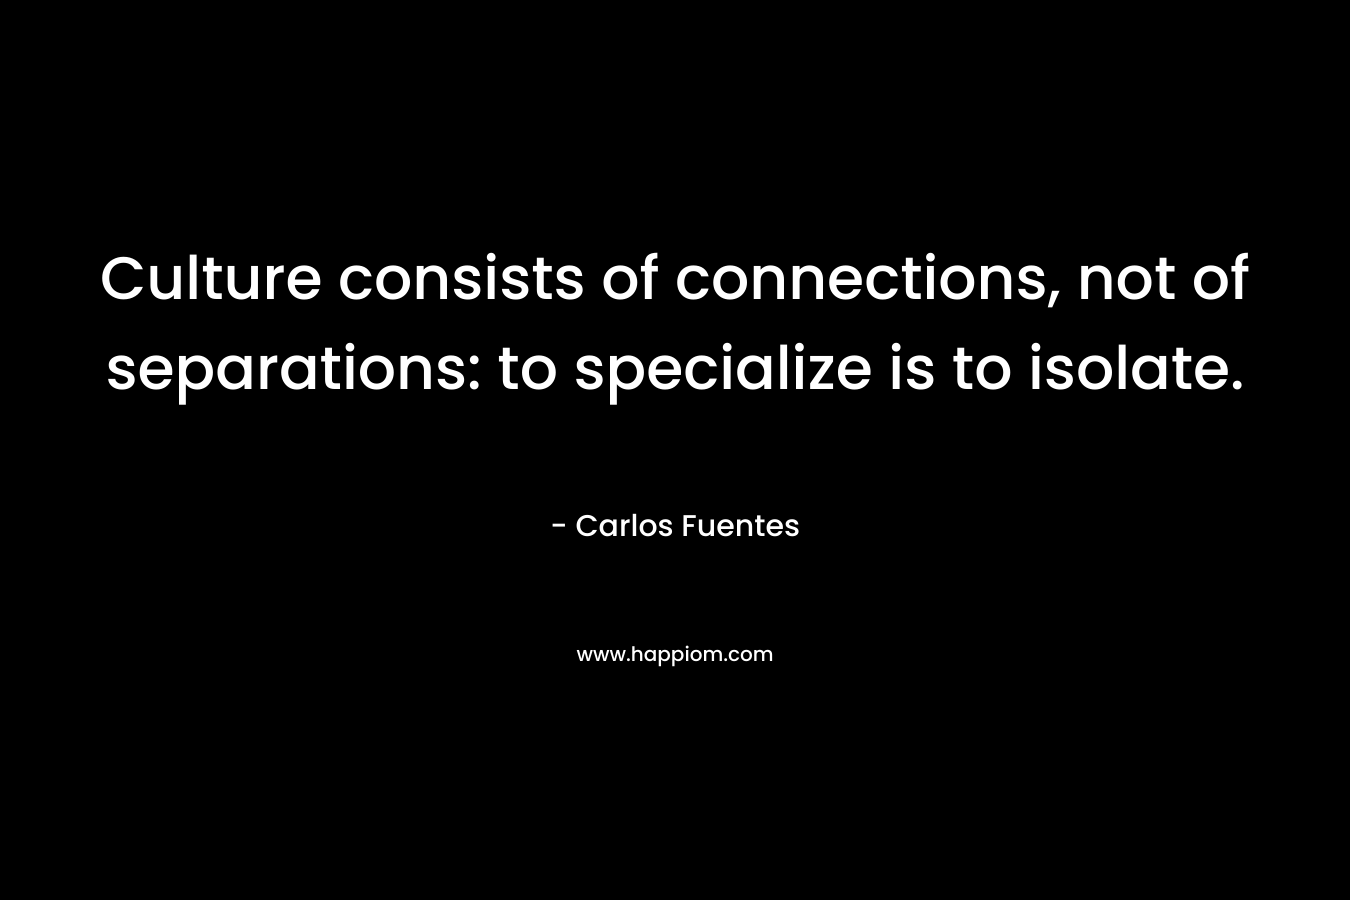 Culture consists of connections, not of separations: to specialize is to isolate. – Carlos Fuentes